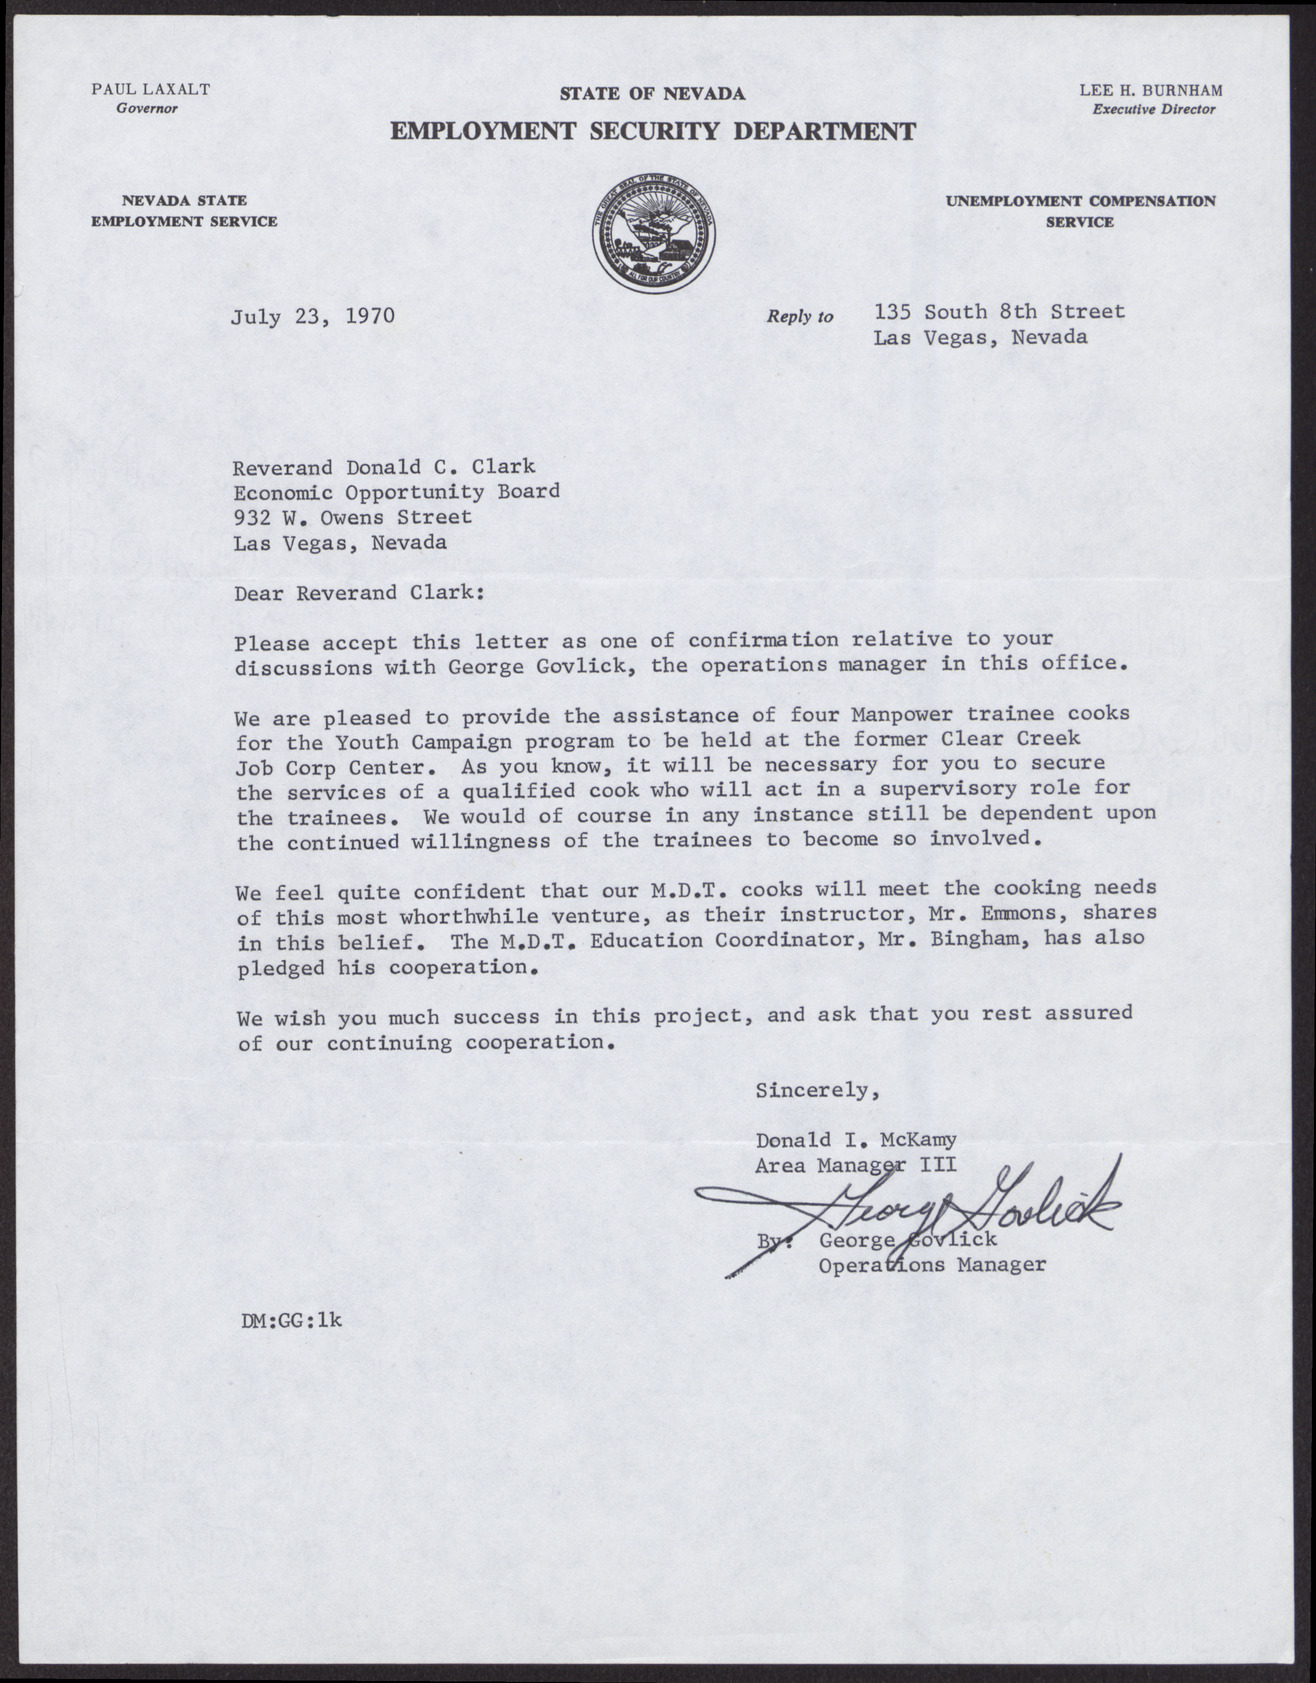 Letter to Reverend Donald Clark from Donald I. McKamy, July 23, 1970